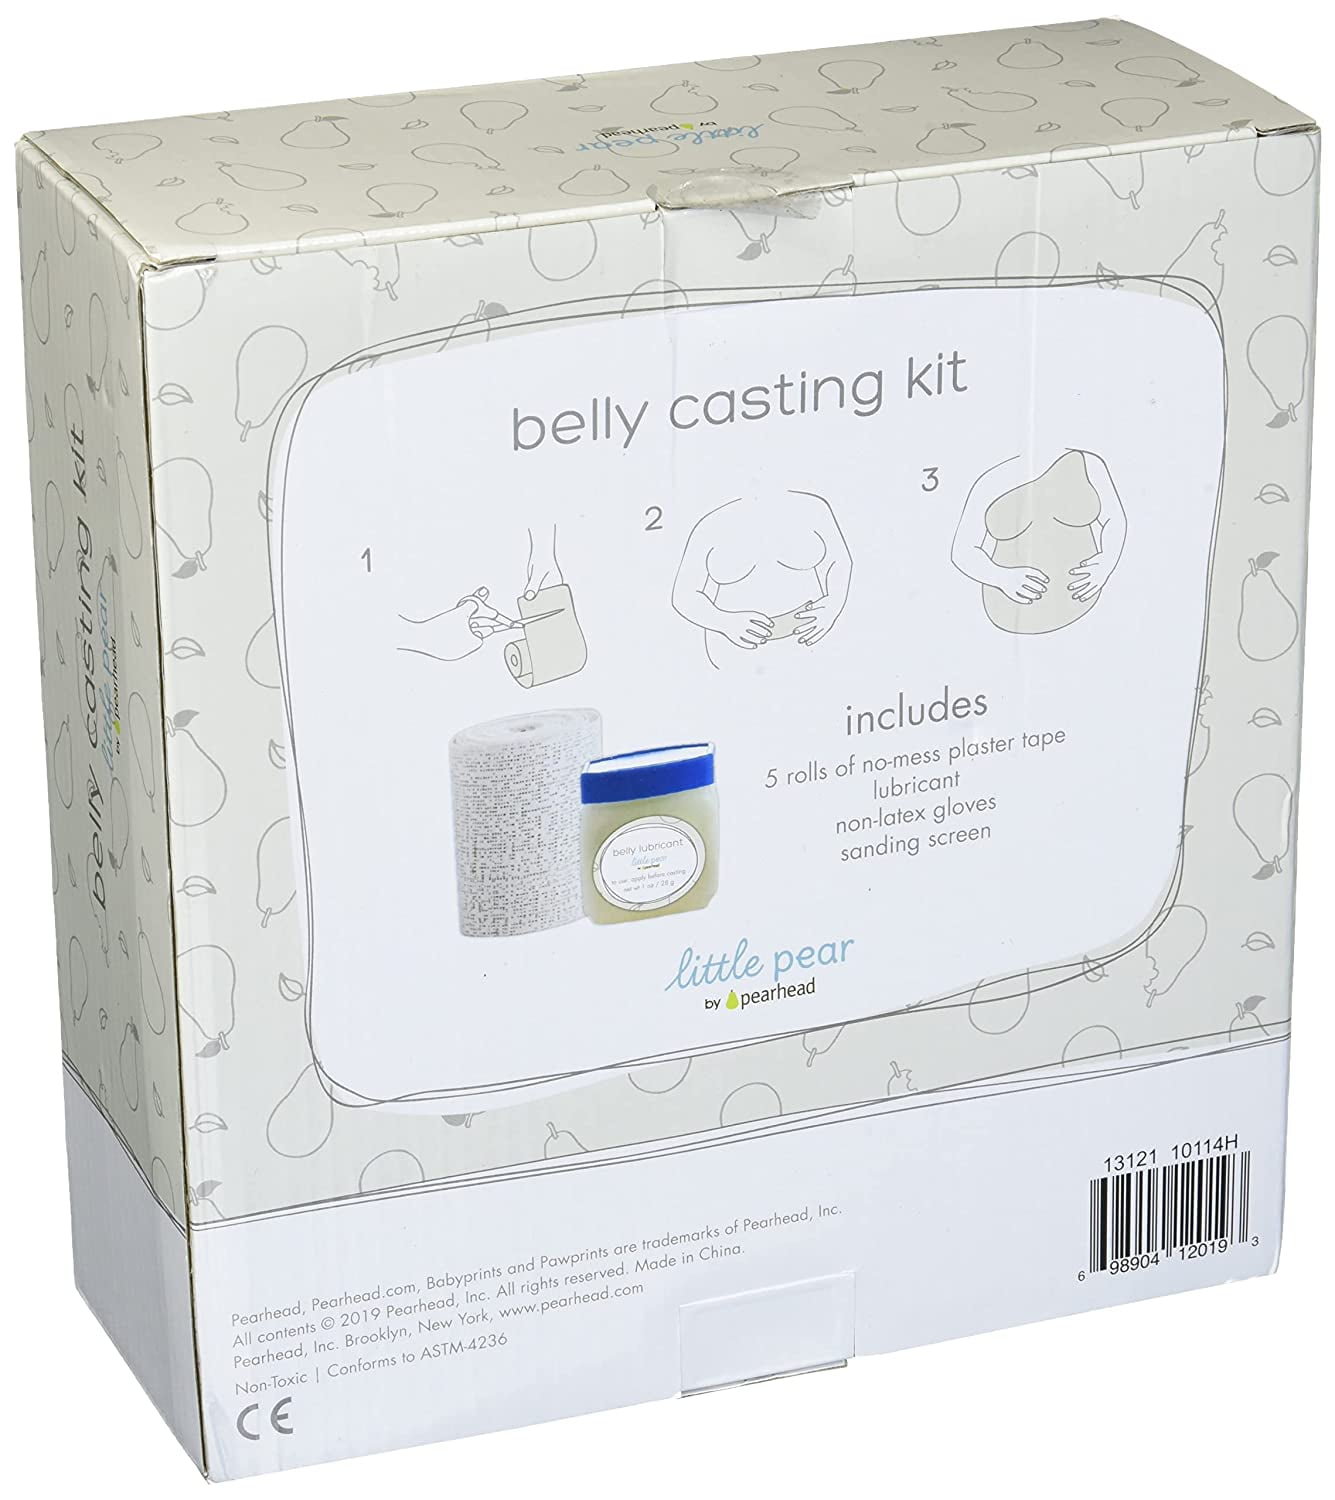 Pearhead Belly Casting Kit 1 ct